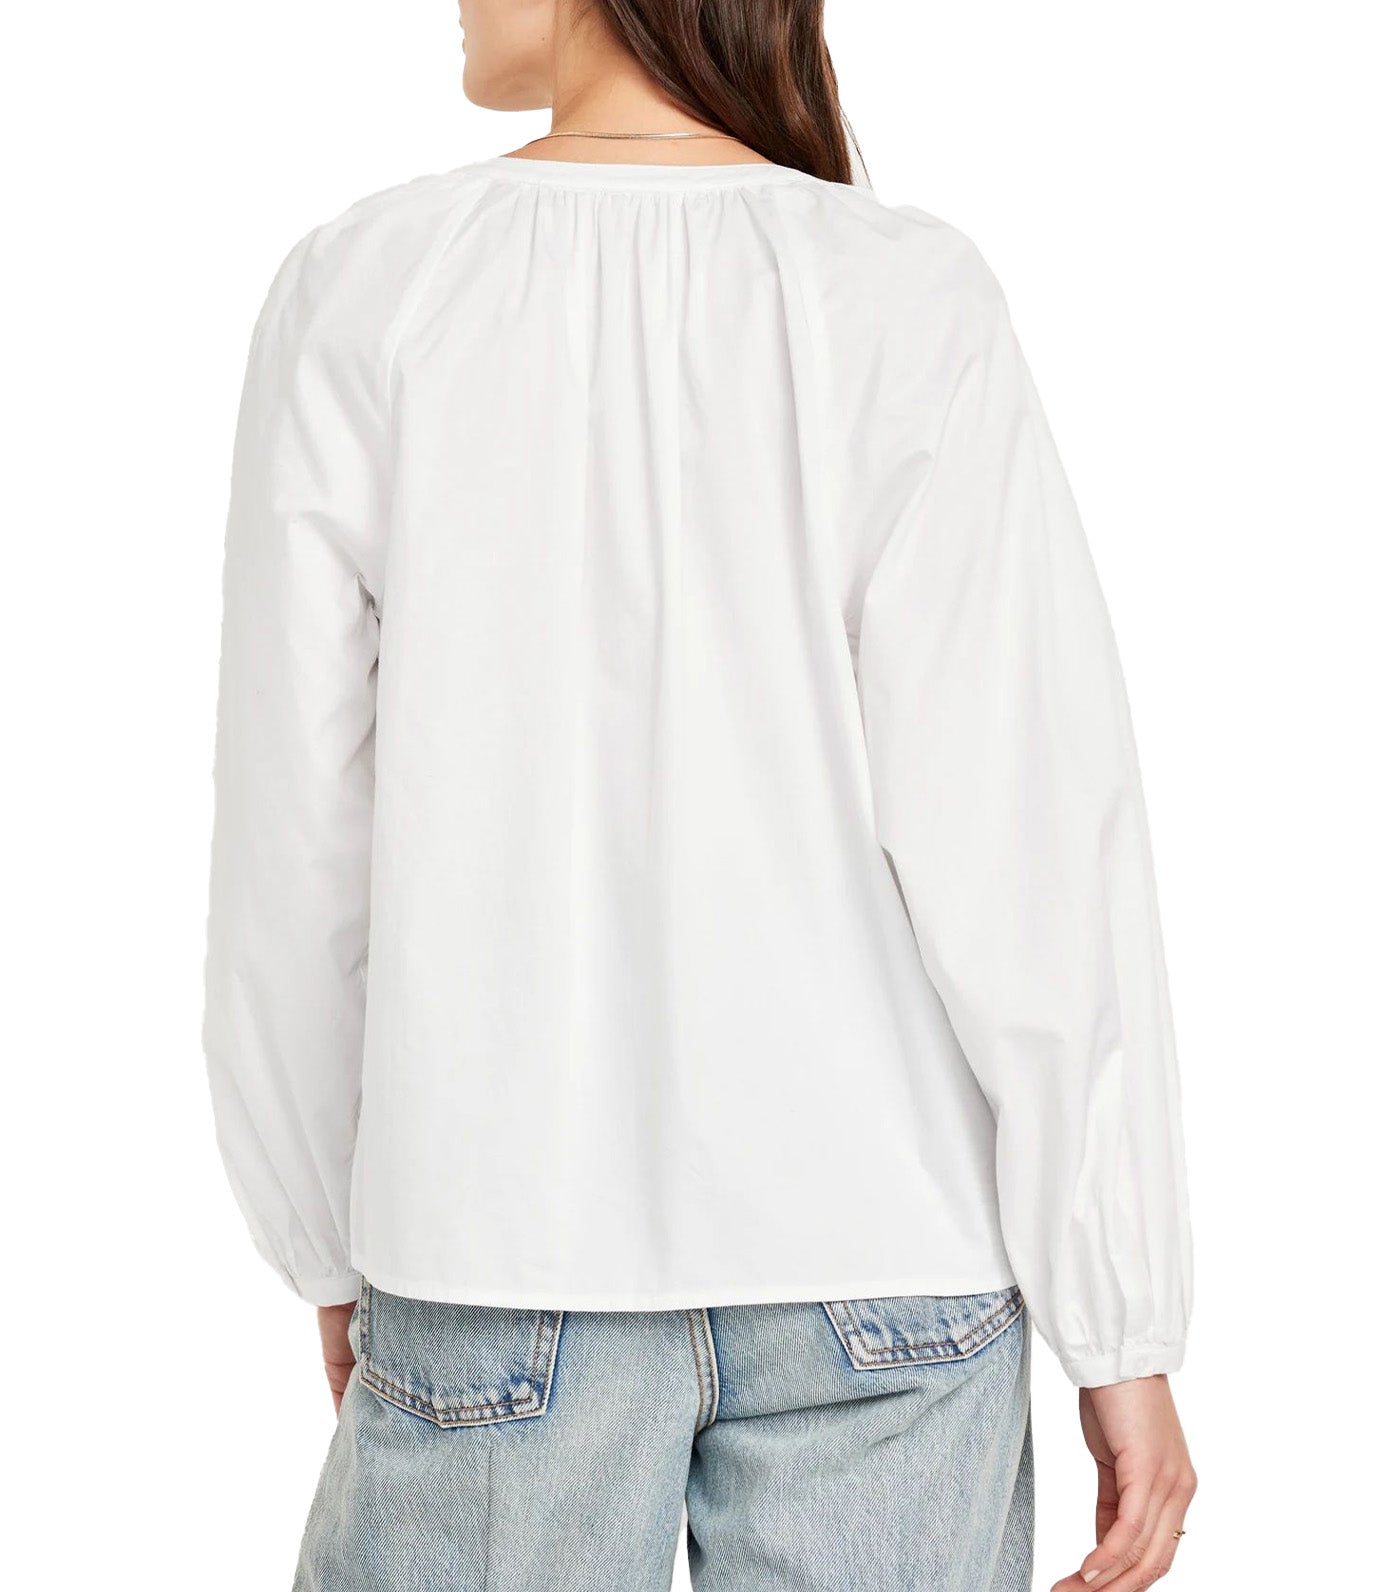 Long-Sleeve Split-Neck Top for Women Calla Lily 451